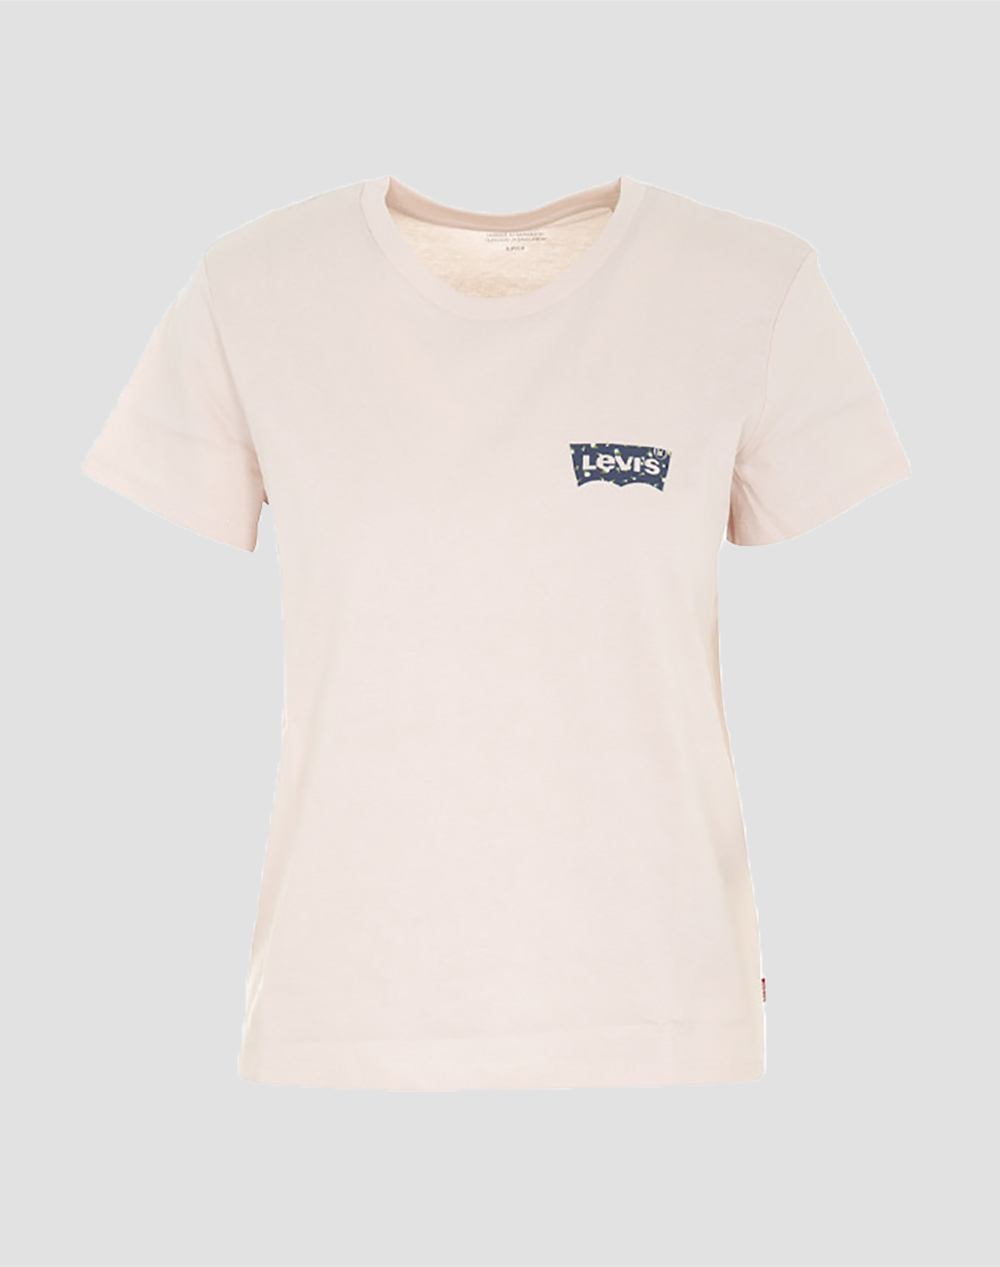 LEVIS THE PERFECT TEE 17369-2490-2490 LightPink 3810ALEVI3400125_XR28068